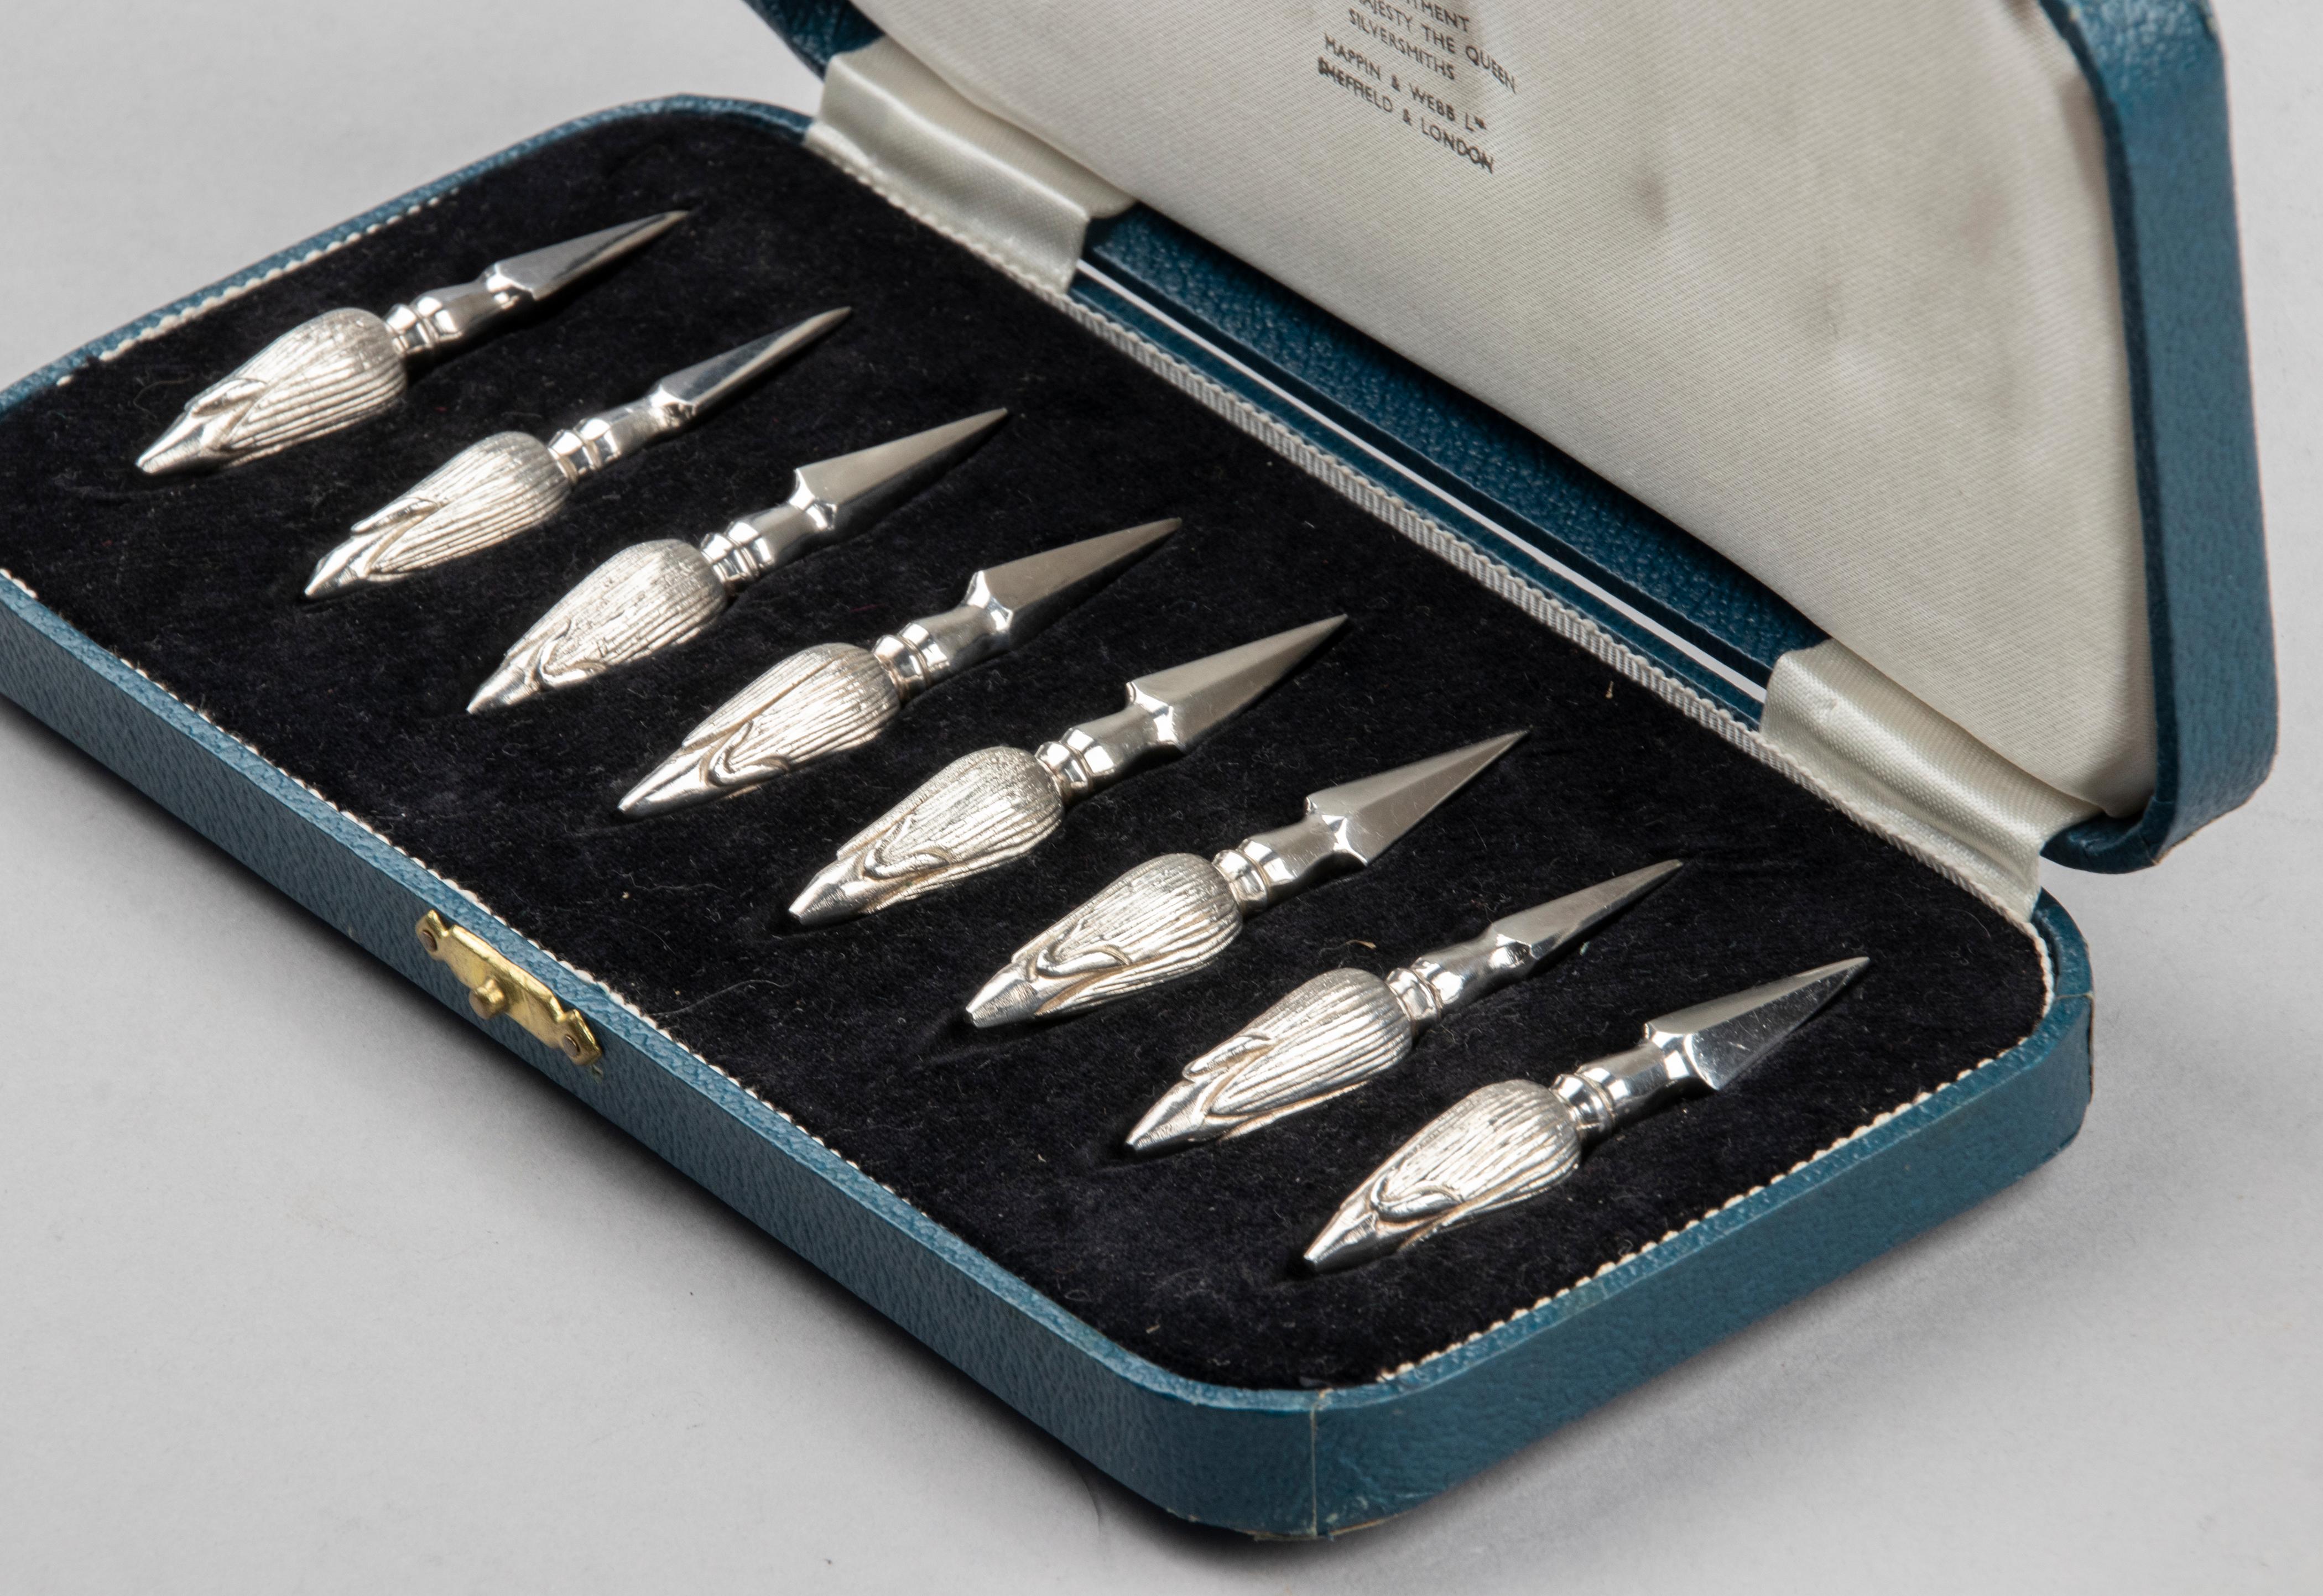 Special set of 8 silver plated corn cob holders made by the English brand Mappin & Webb. The picks are inserted into the ends of a corn cob to be able to eat the cobs in an elegant way. The picks are of a nice quality, refined and detailed.
The set